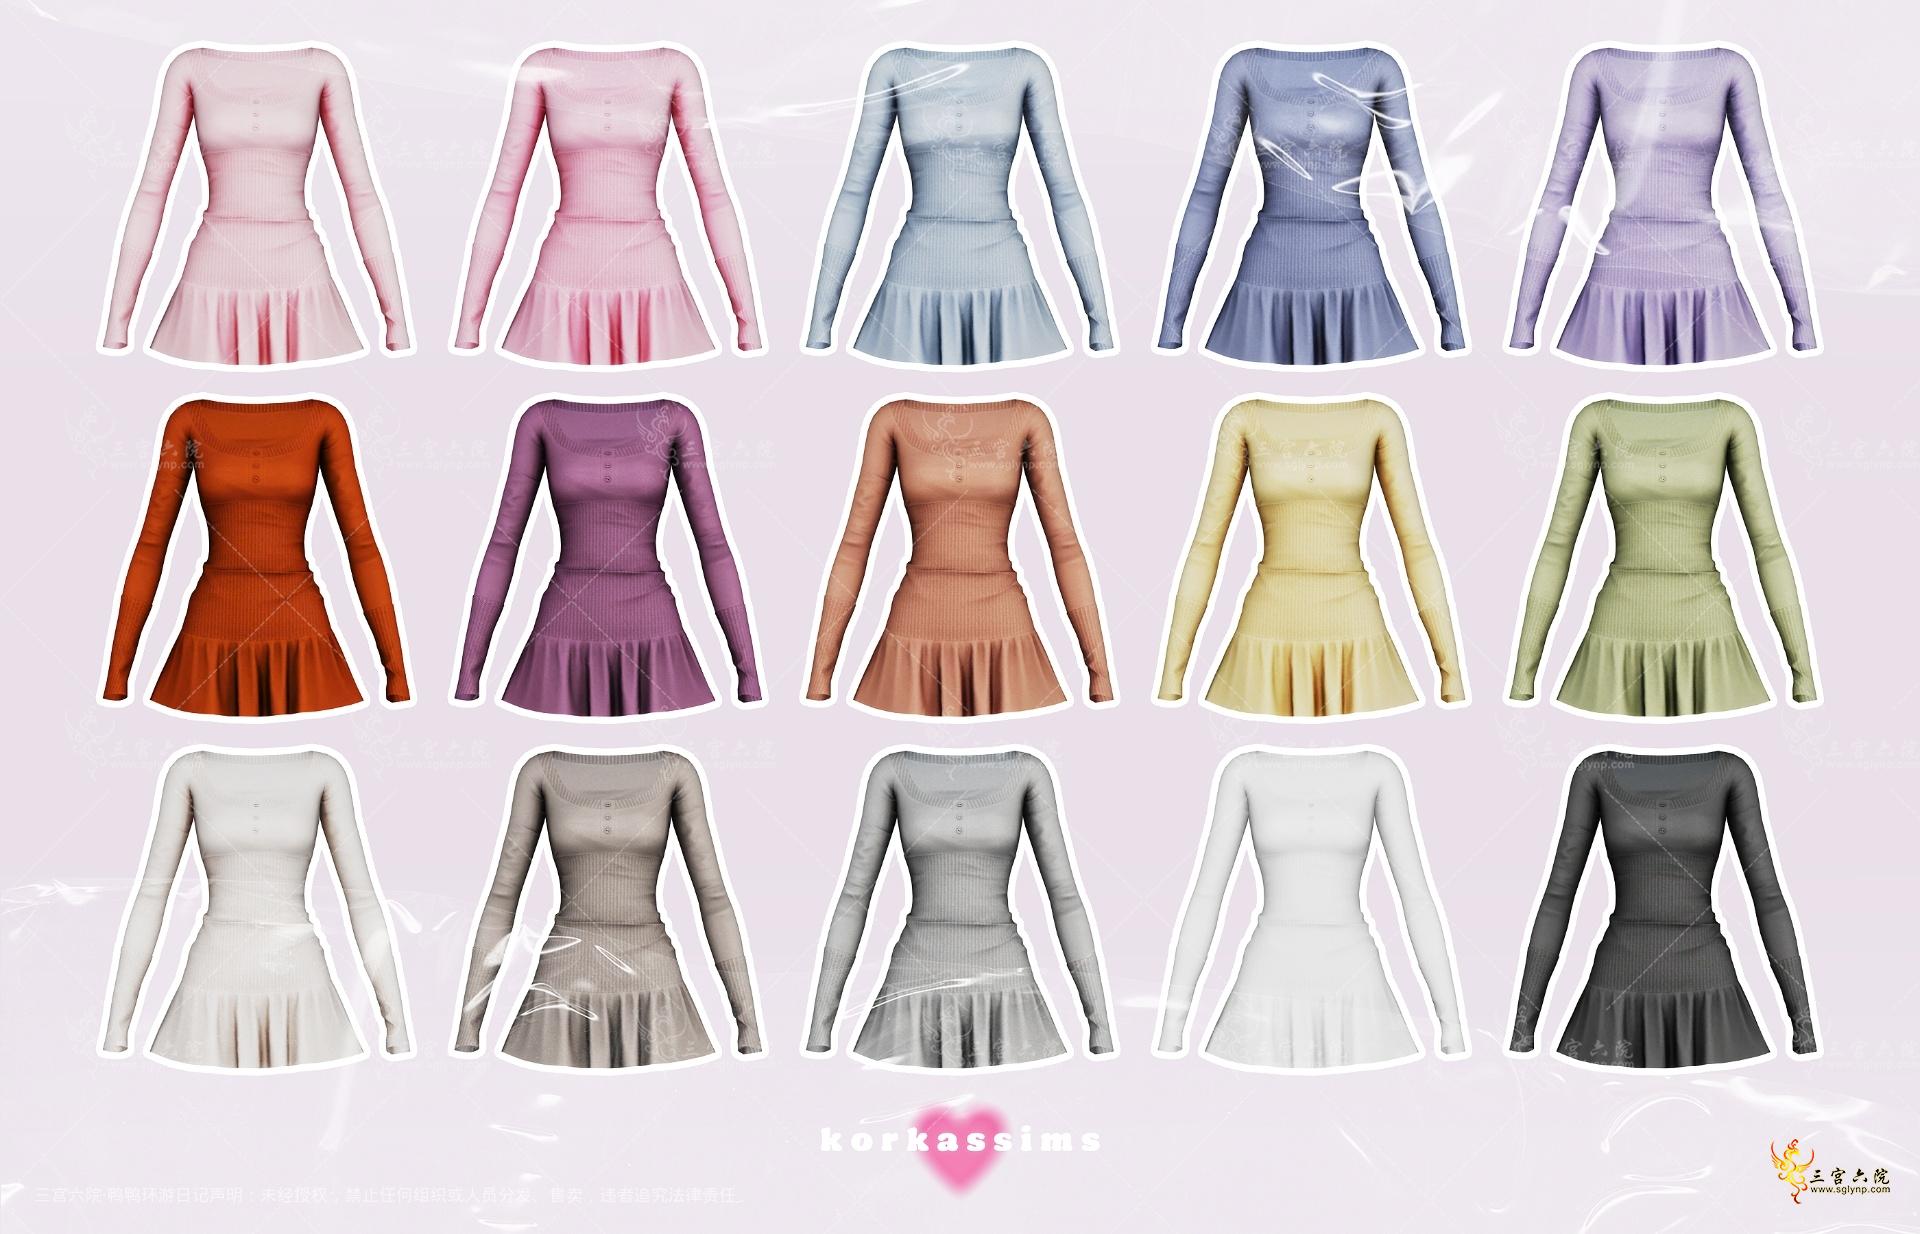 mimi dress swatches.png